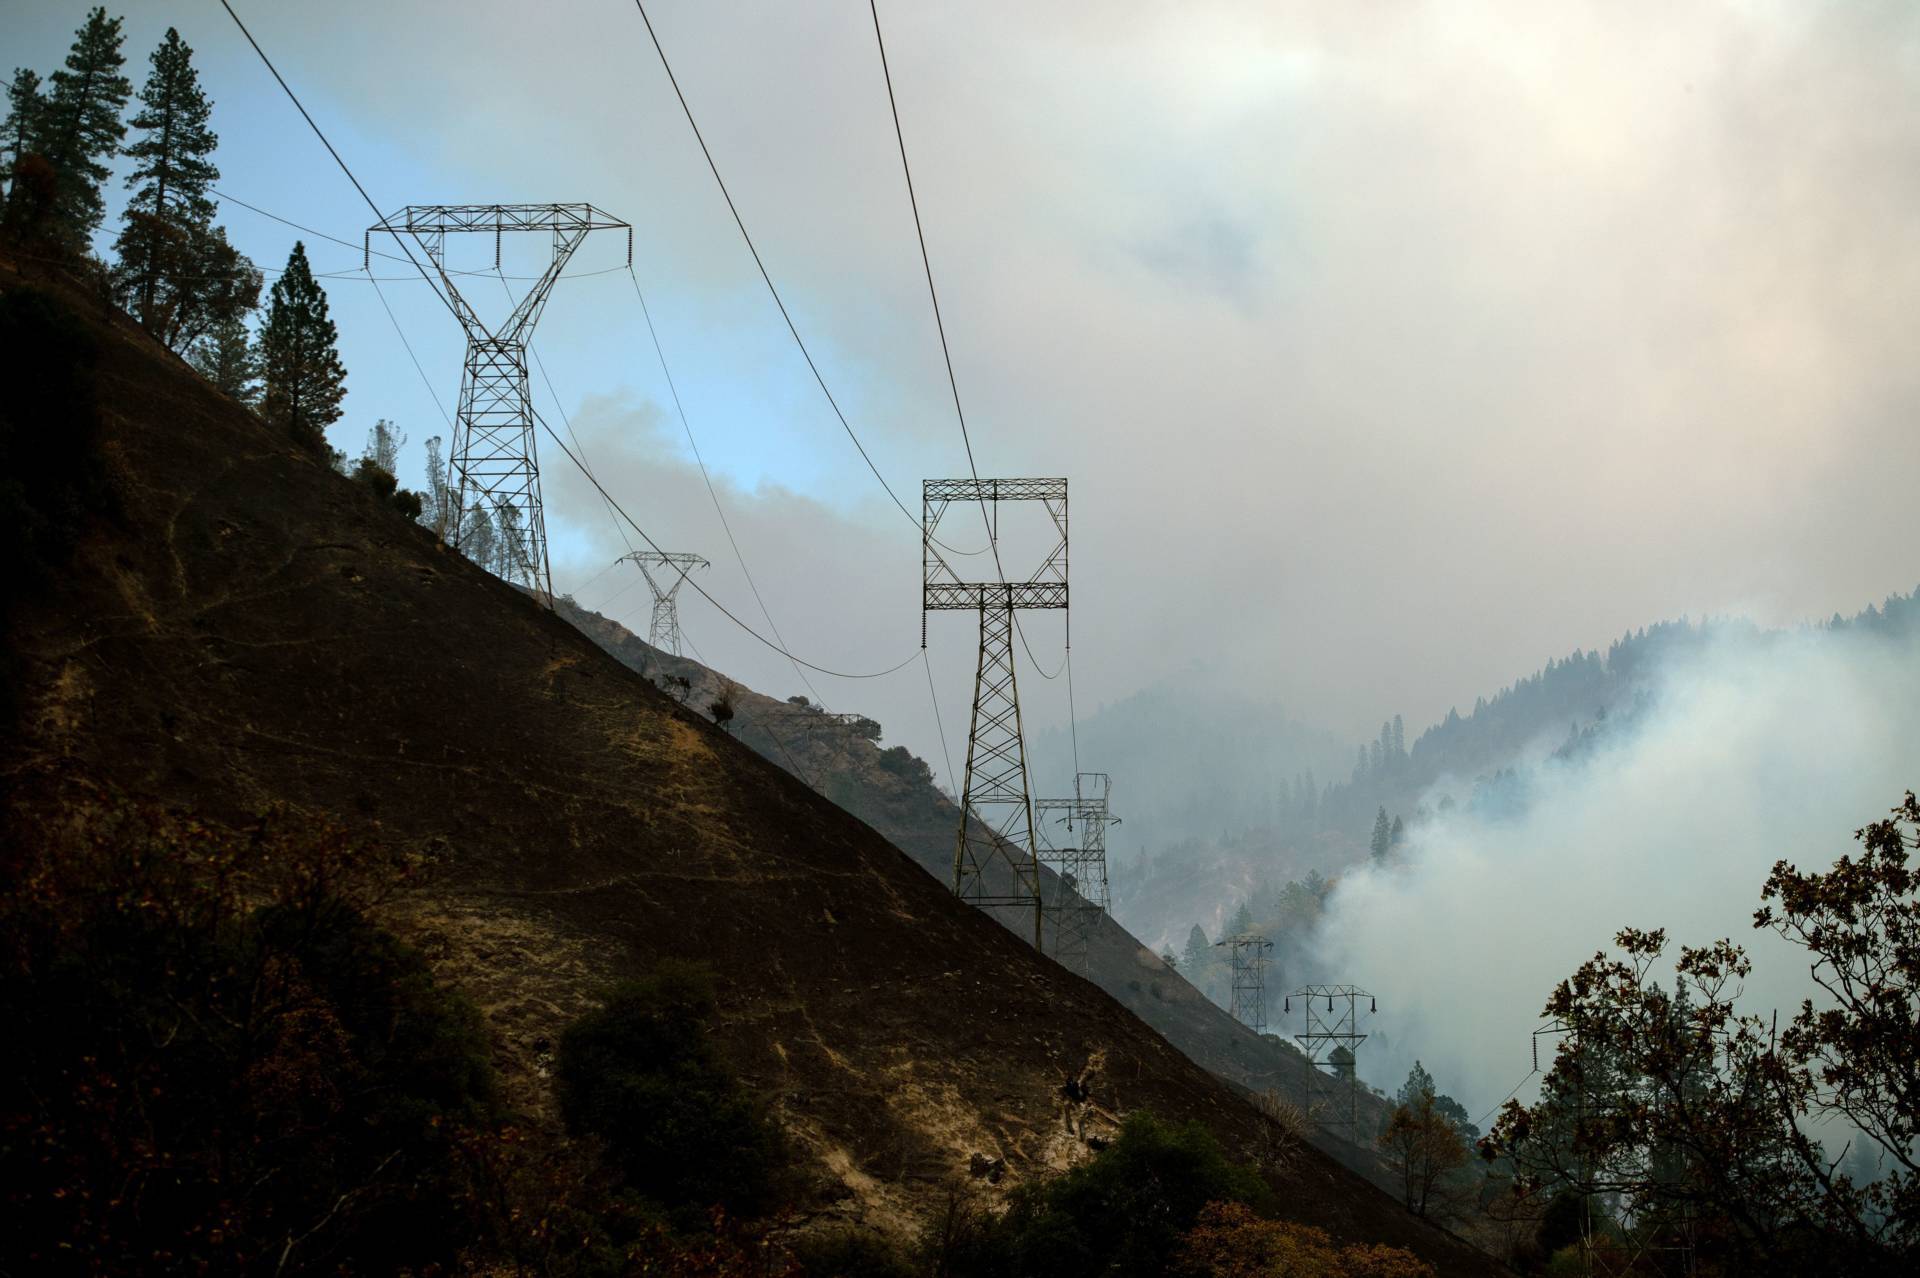 PG&amp;E transmission  towers on the Caribou-Palermo line are seen against a smoky landscape adjacent to the Feather River in Butte County last November. The towers are close to the spot where officials say the Camp Fire began. Josh Edelson/AFP-Getty Images